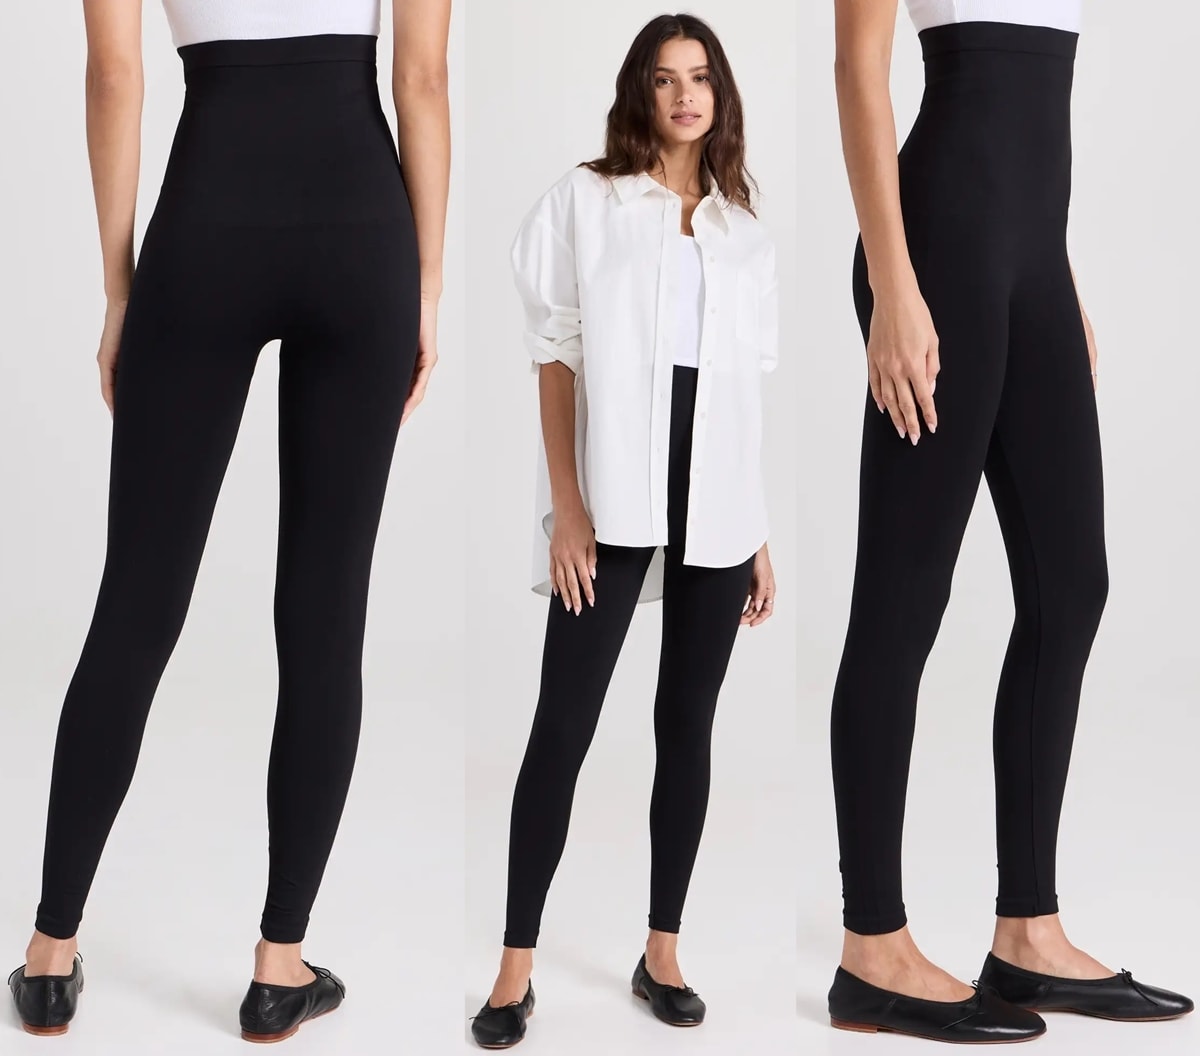 Effortlessly Chic: A modern take on Audrey Hepburn's elegance, featuring sleek black leggings paired with classic ballet flats, complemented by an airy oversized white blouse for a polished yet comfortable business casual ensemble